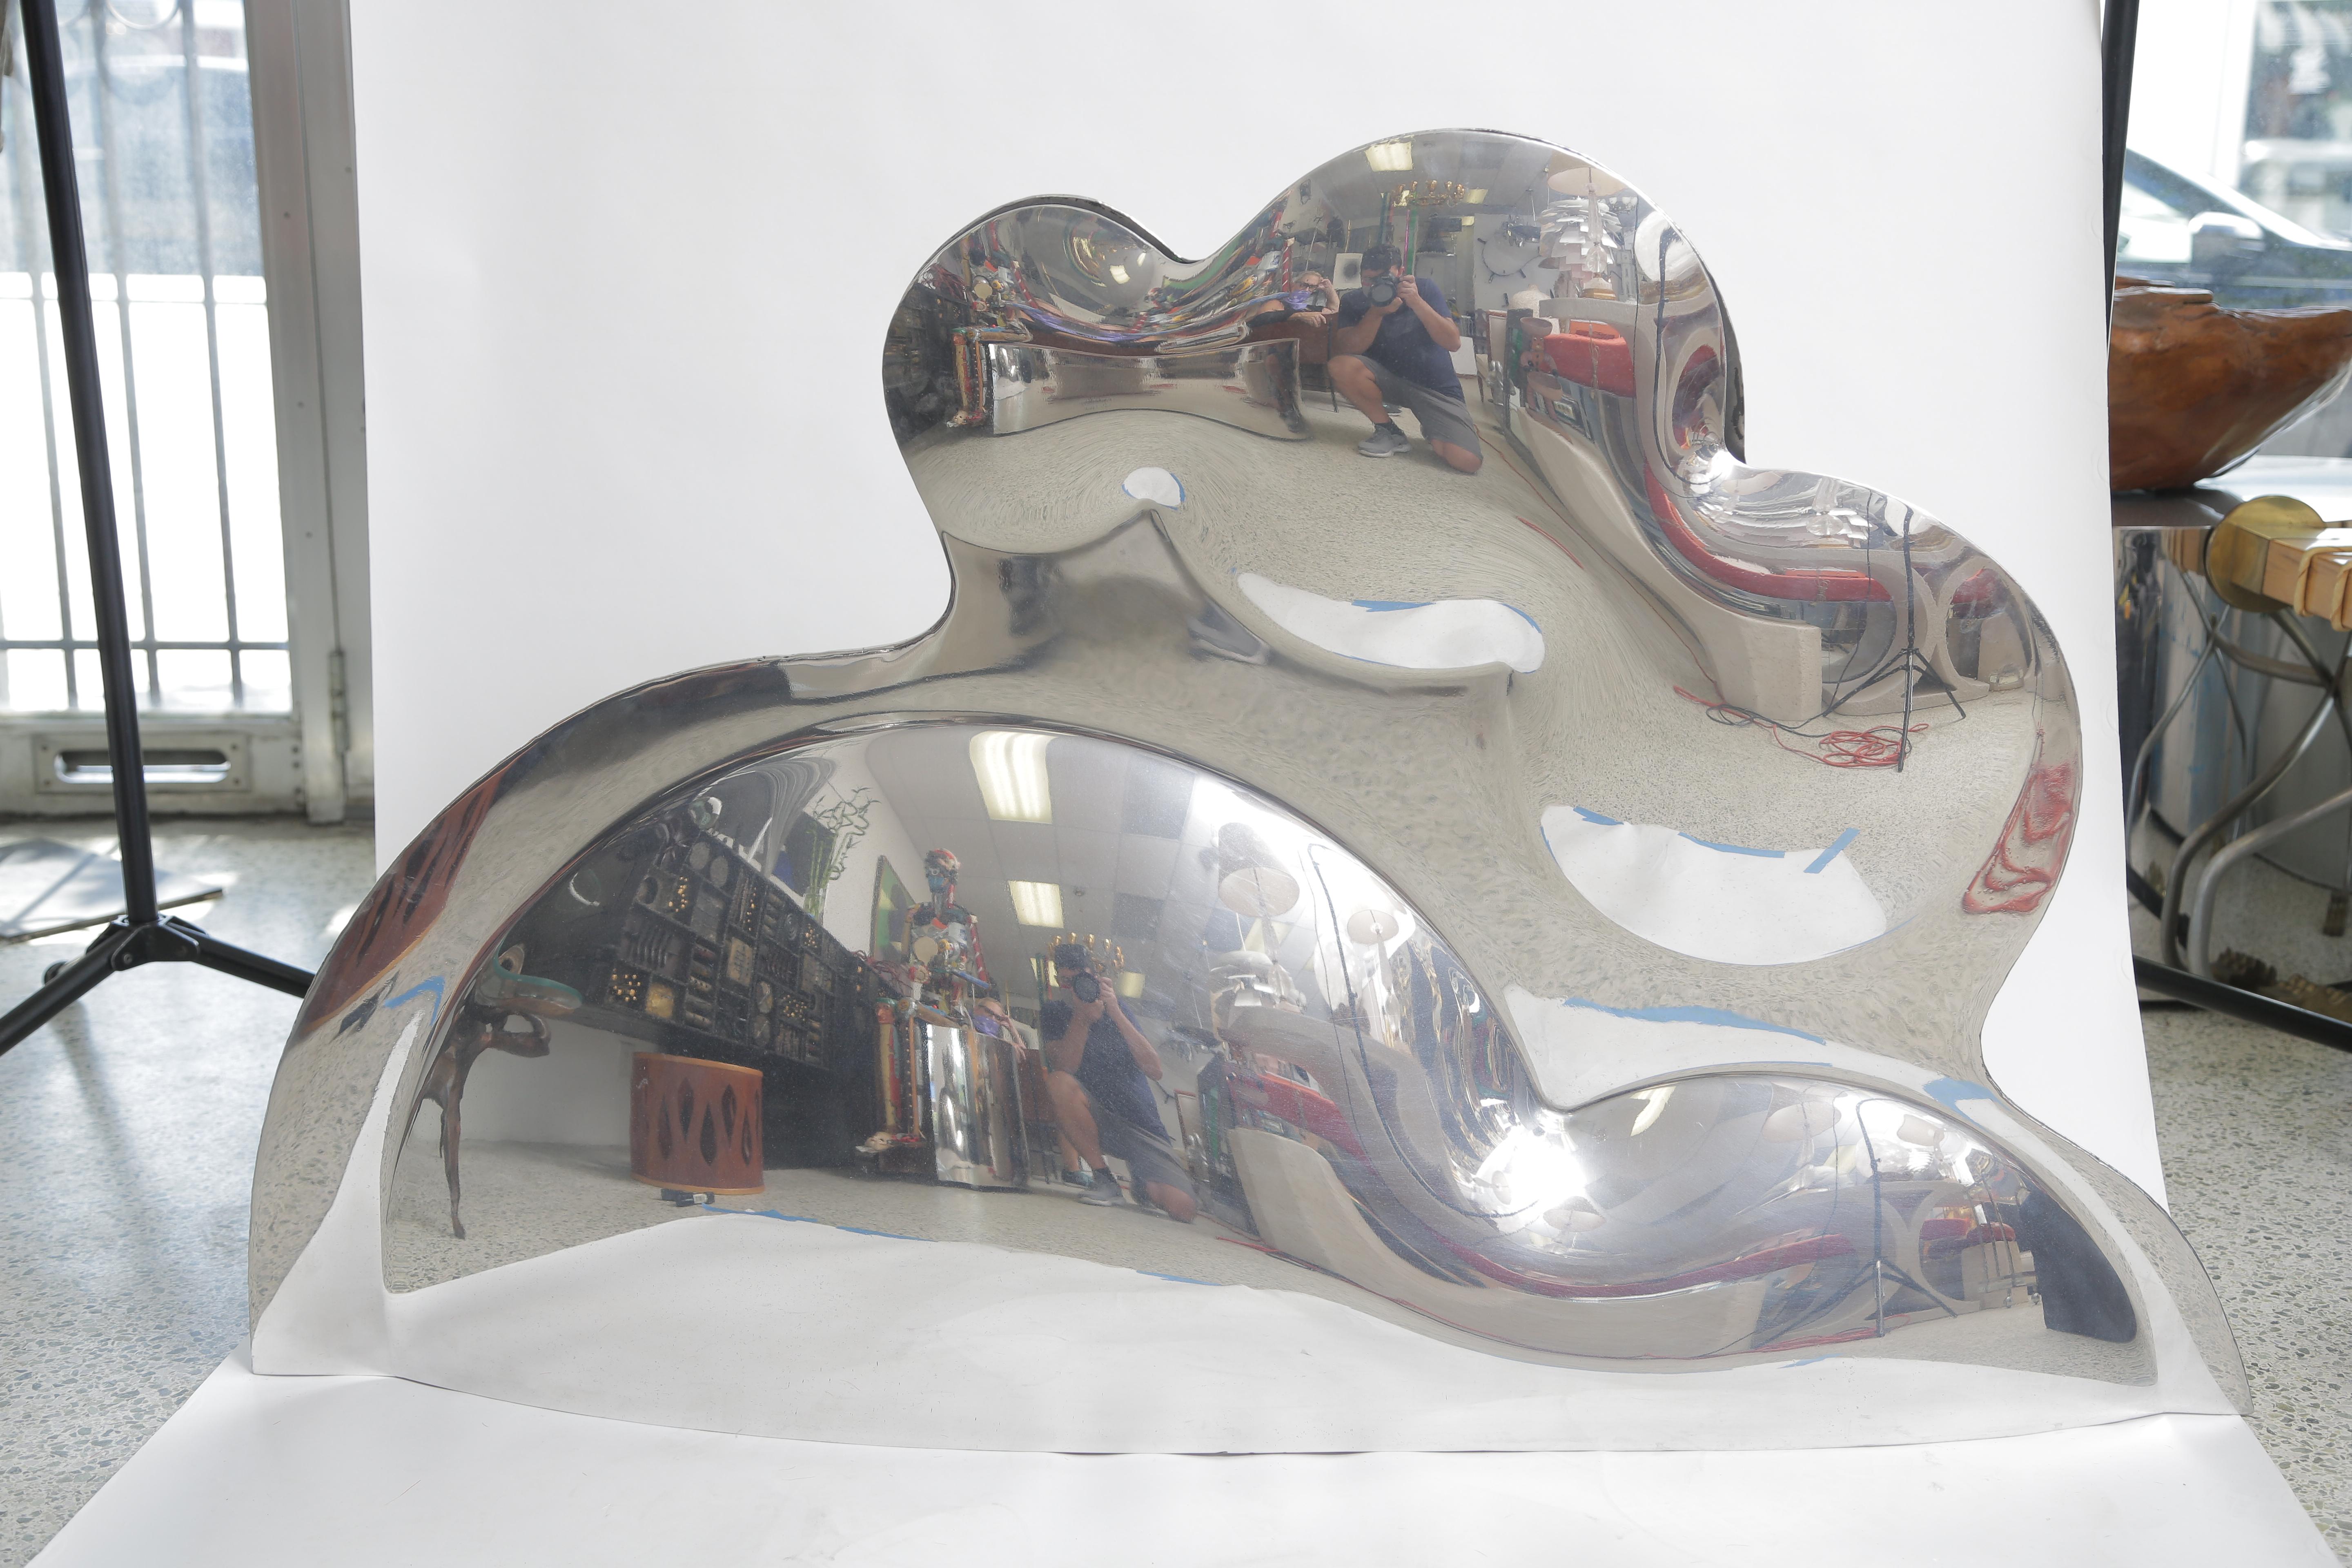 Ron Arad used aluminum blow molding to create a collection of
unique works for his B.O.O.P.( Blown Out of Proportion) Series.
Inflated Mirror-Polish Aluminum
United Kingdom, circa 1999
This work is unique, large 33